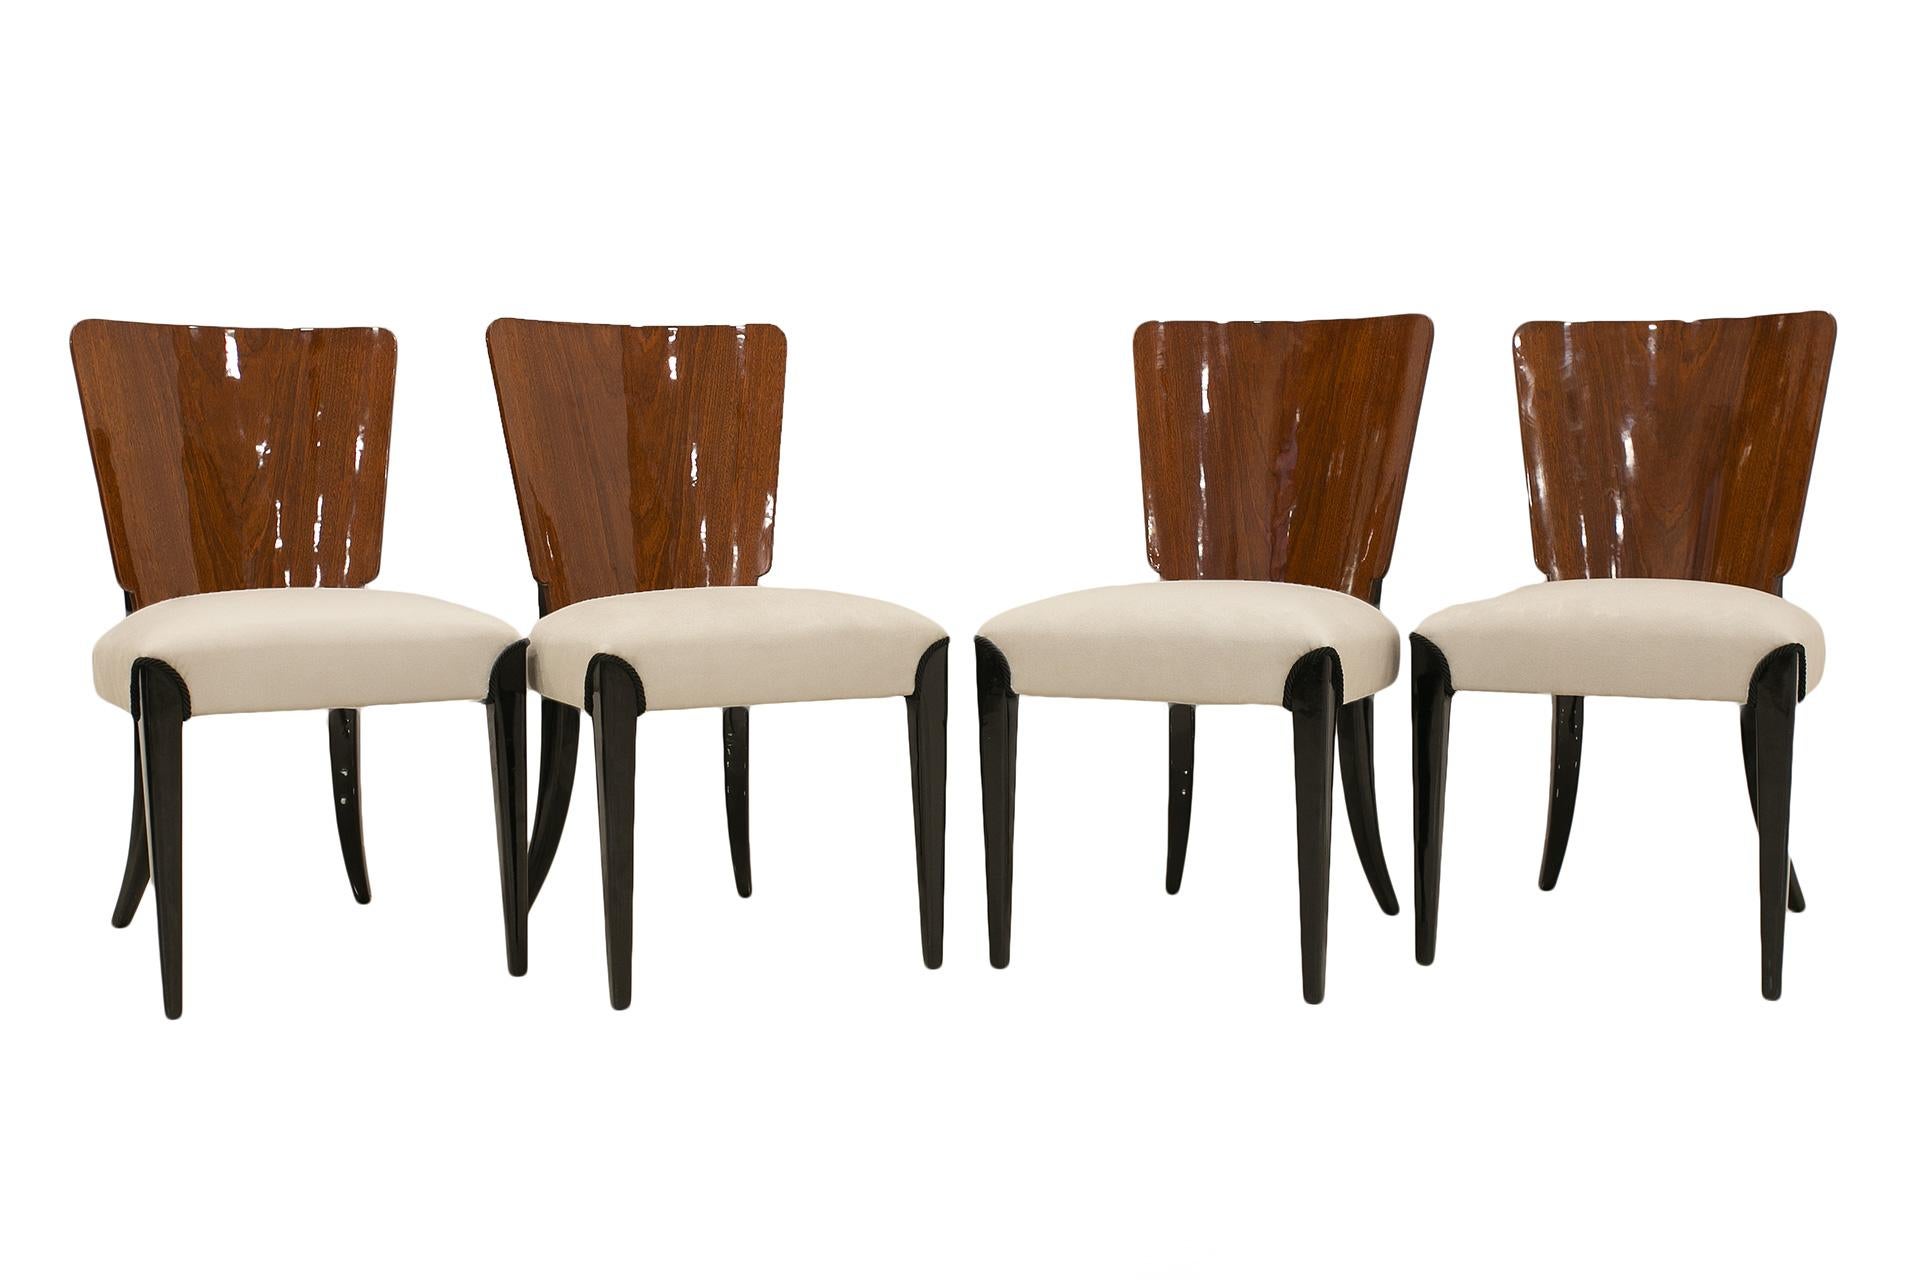 Set of 4 Chairs by J. Halabala, Czechoslovakia, 1930s In Excellent Condition In Wrocław, Poland